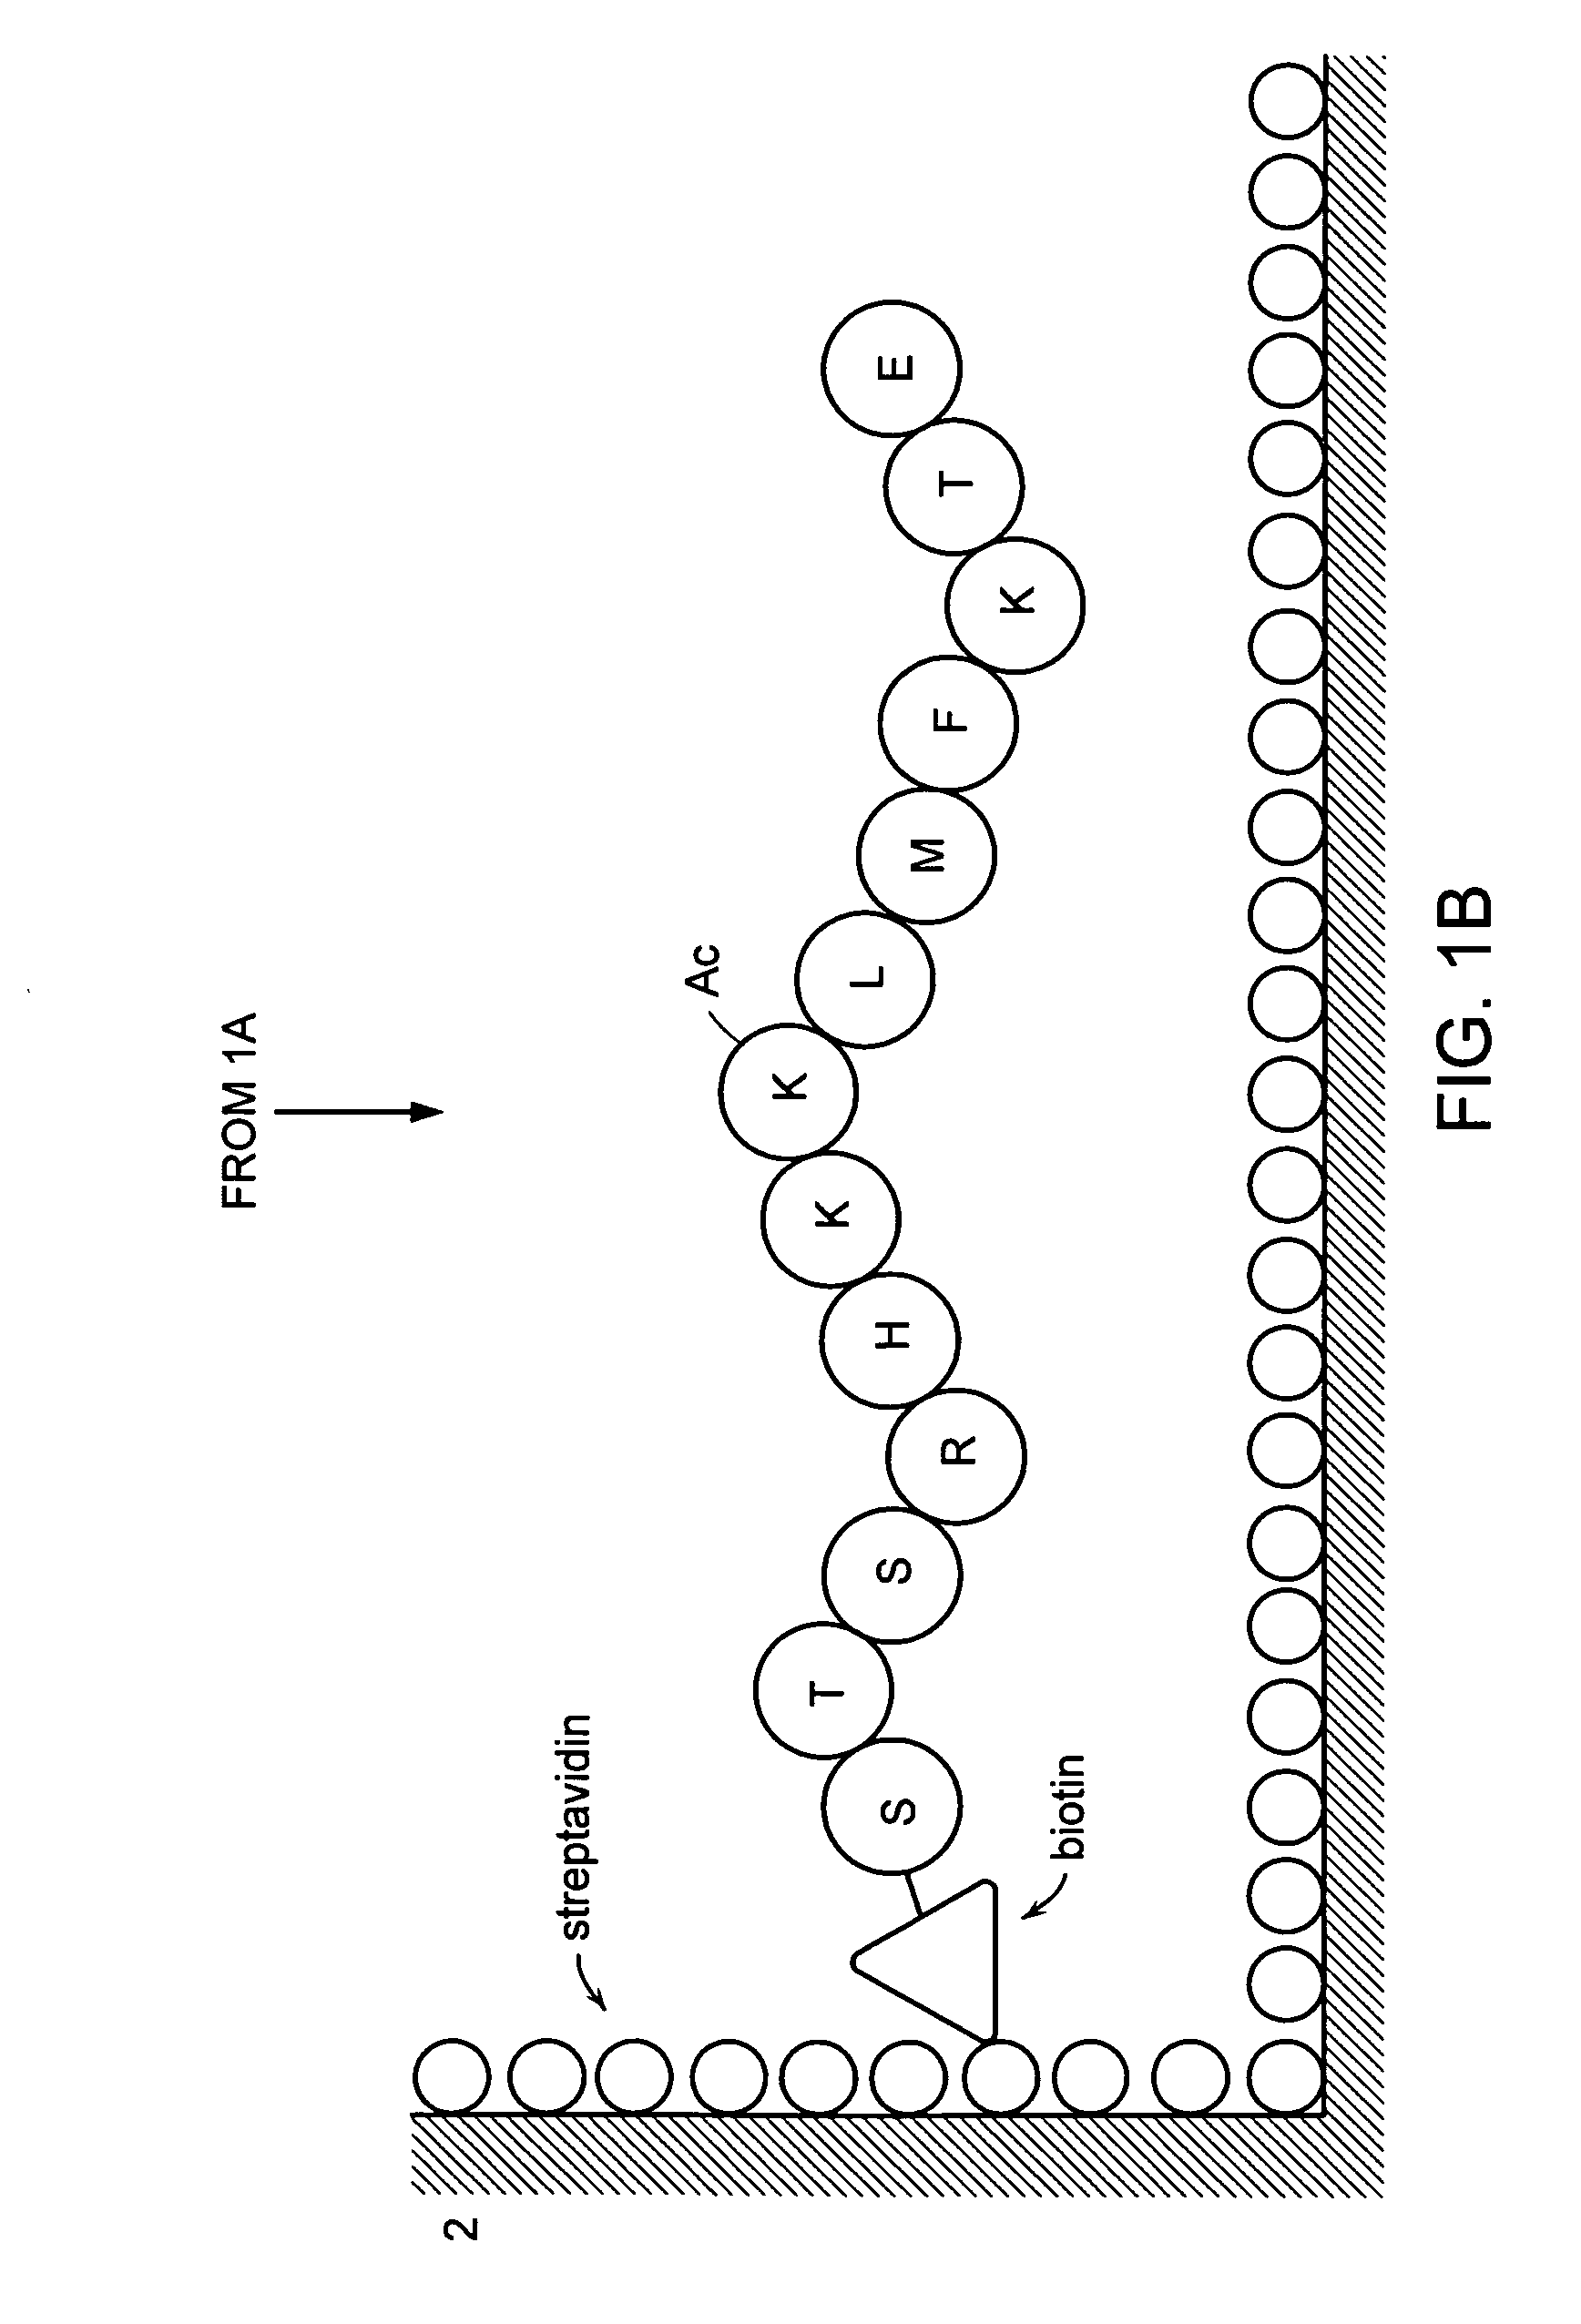 Method for detecting acetyltransferase and deacetylase activities and method for screening inhibitors or enhancers of these enzymes